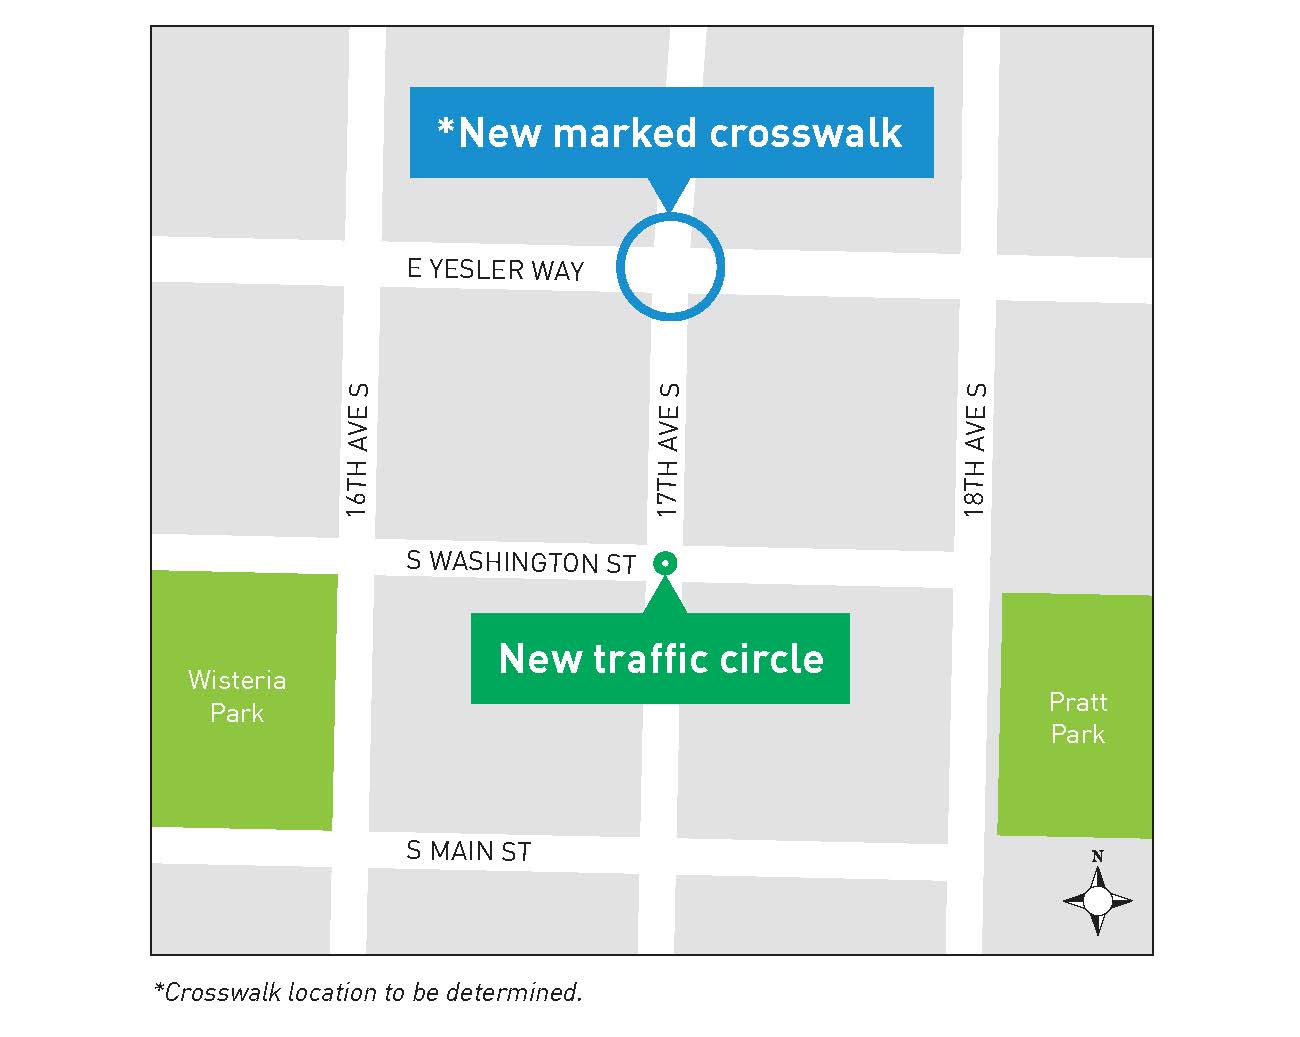 17th Ave South between Yesler Way and South Jackson Street, crossing upgrades map